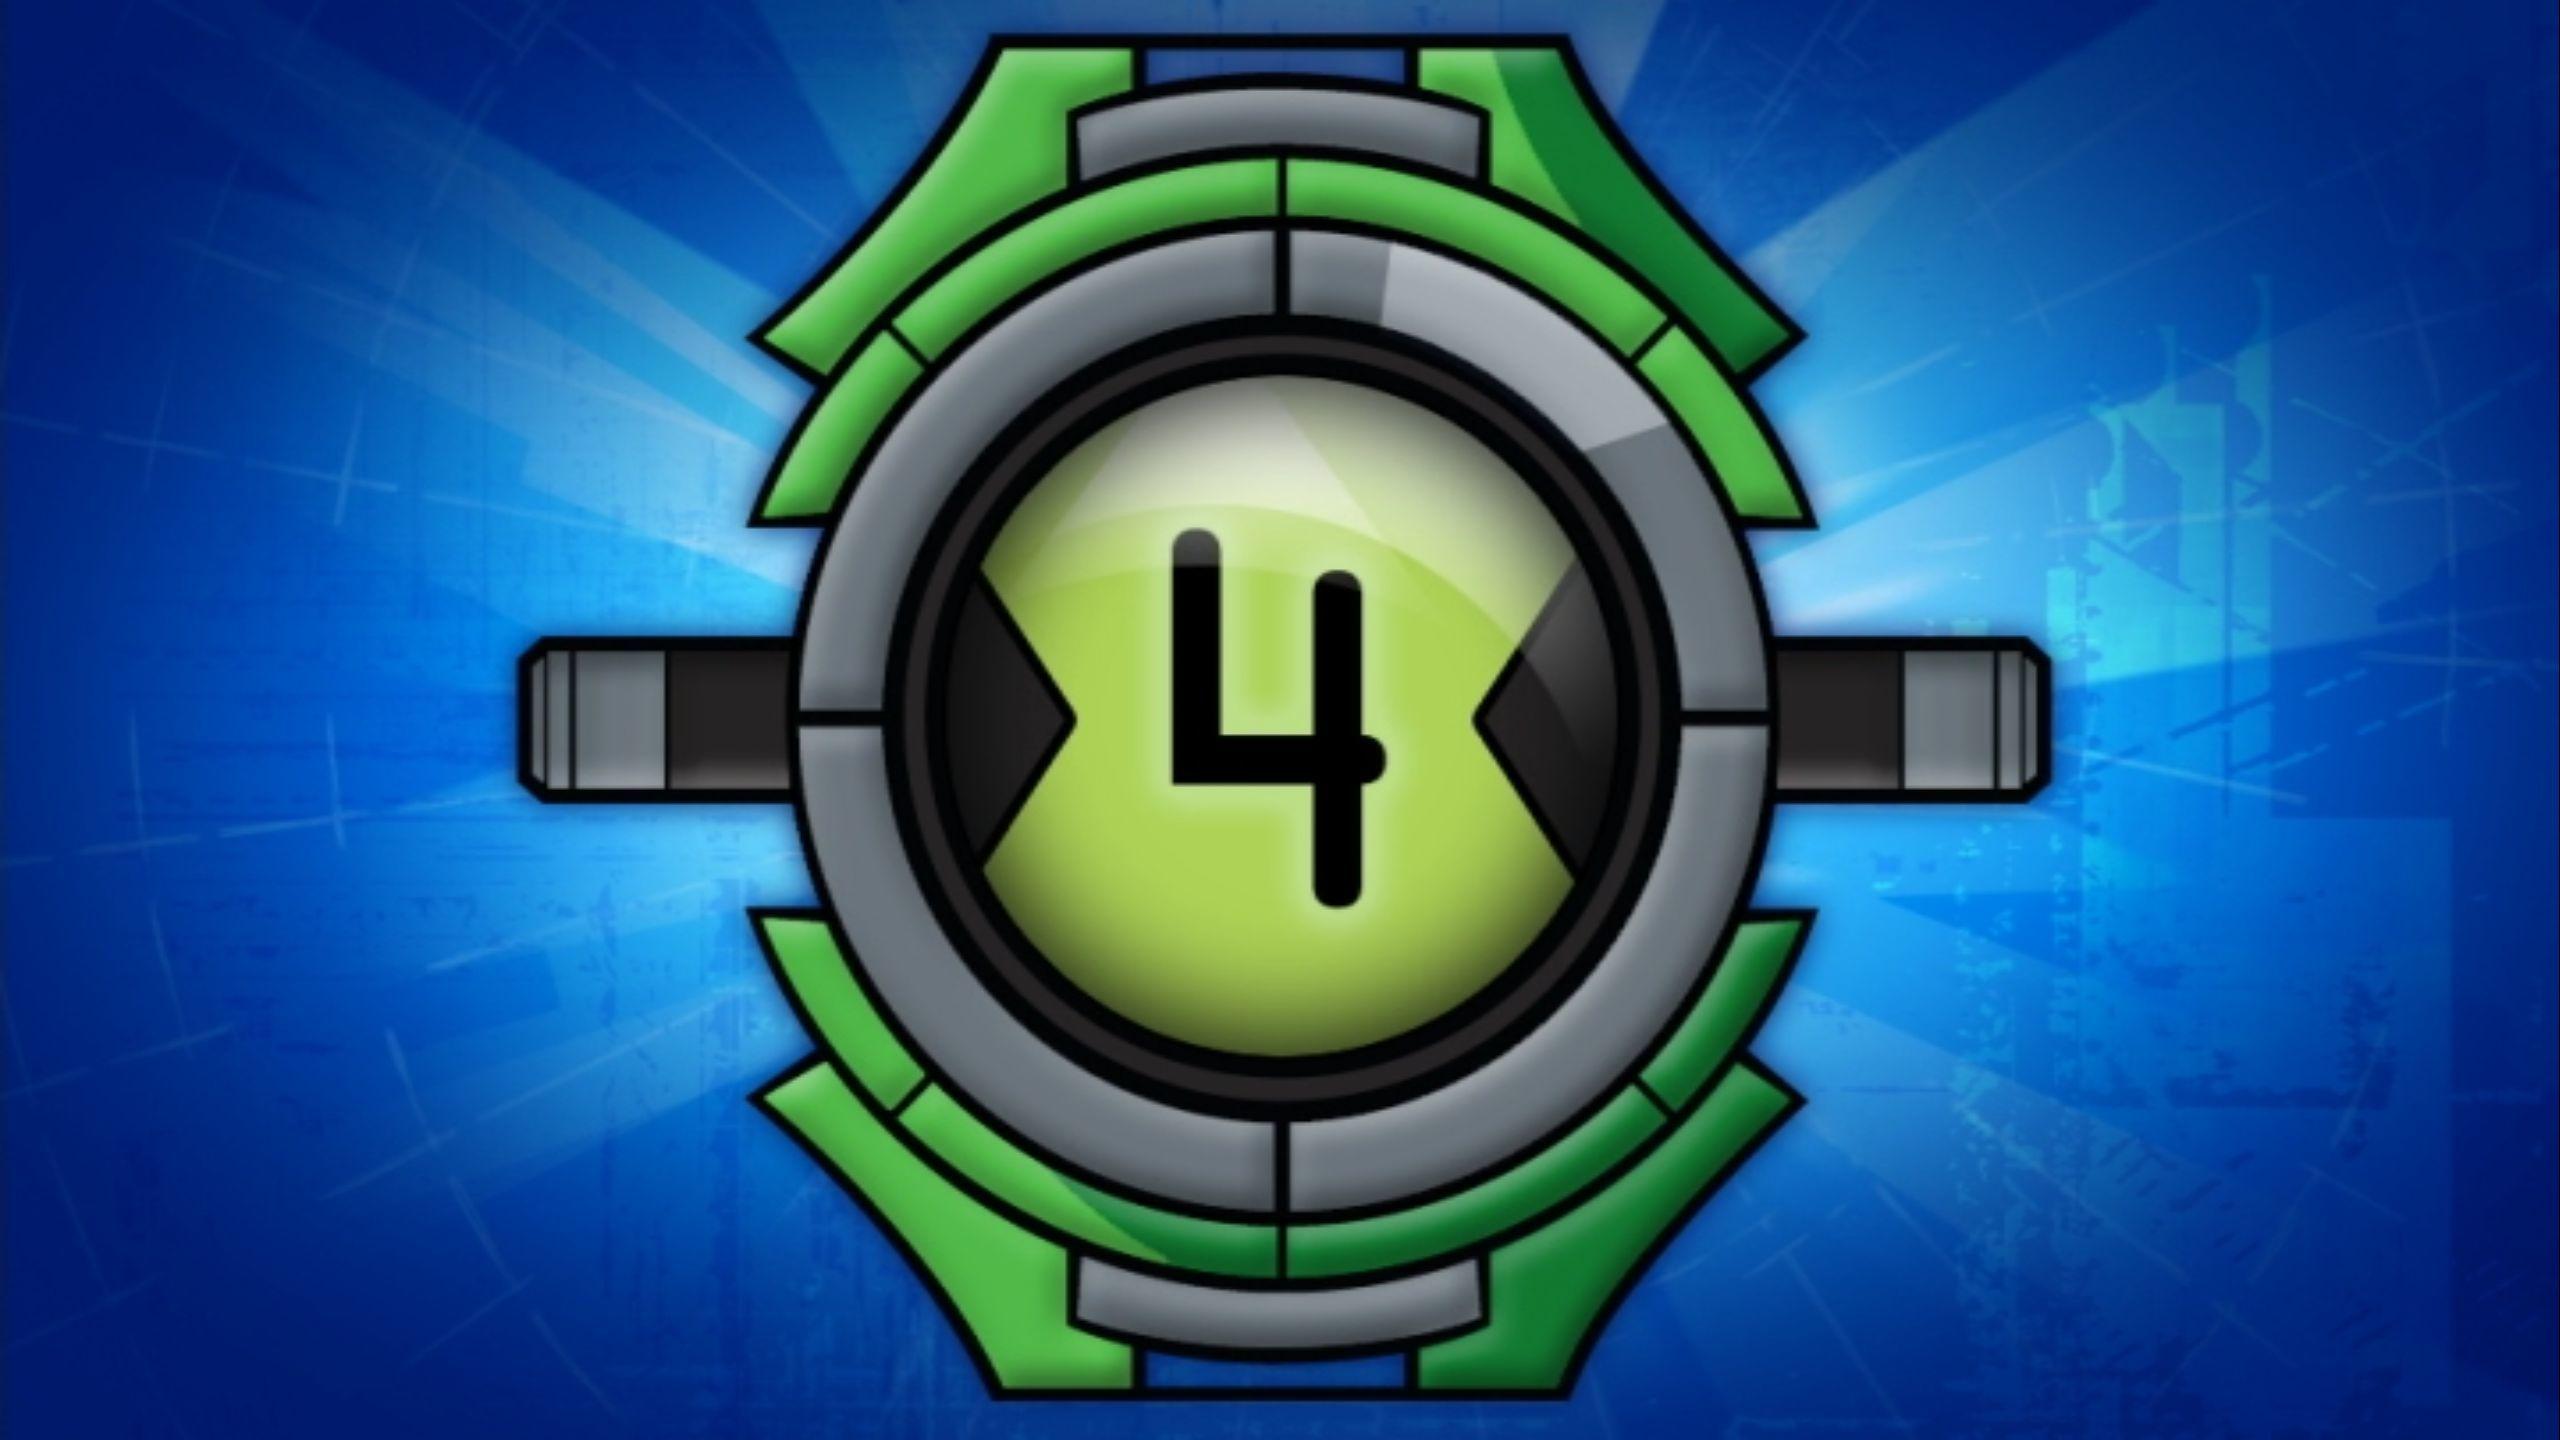 The Omnitrix 'spins' Automatically Dez Alien Force